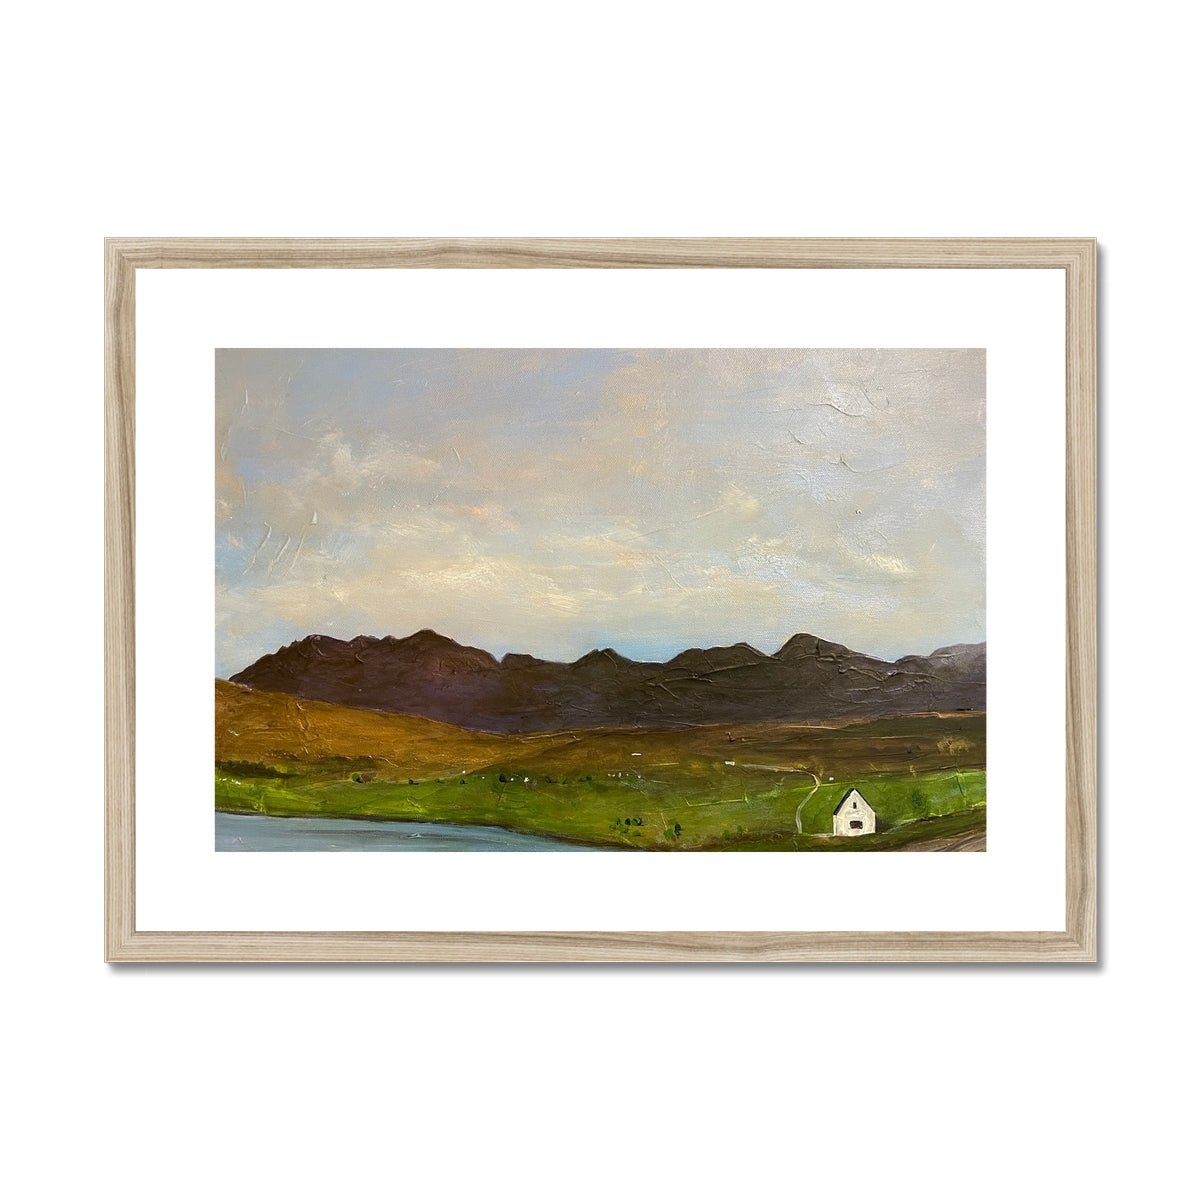 The Road To Carbost Skye Painting | Framed & Mounted Prints From Scotland-Framed & Mounted Prints-Skye Art Gallery-A2 Landscape-Natural Frame-Paintings, Prints, Homeware, Art Gifts From Scotland By Scottish Artist Kevin Hunter